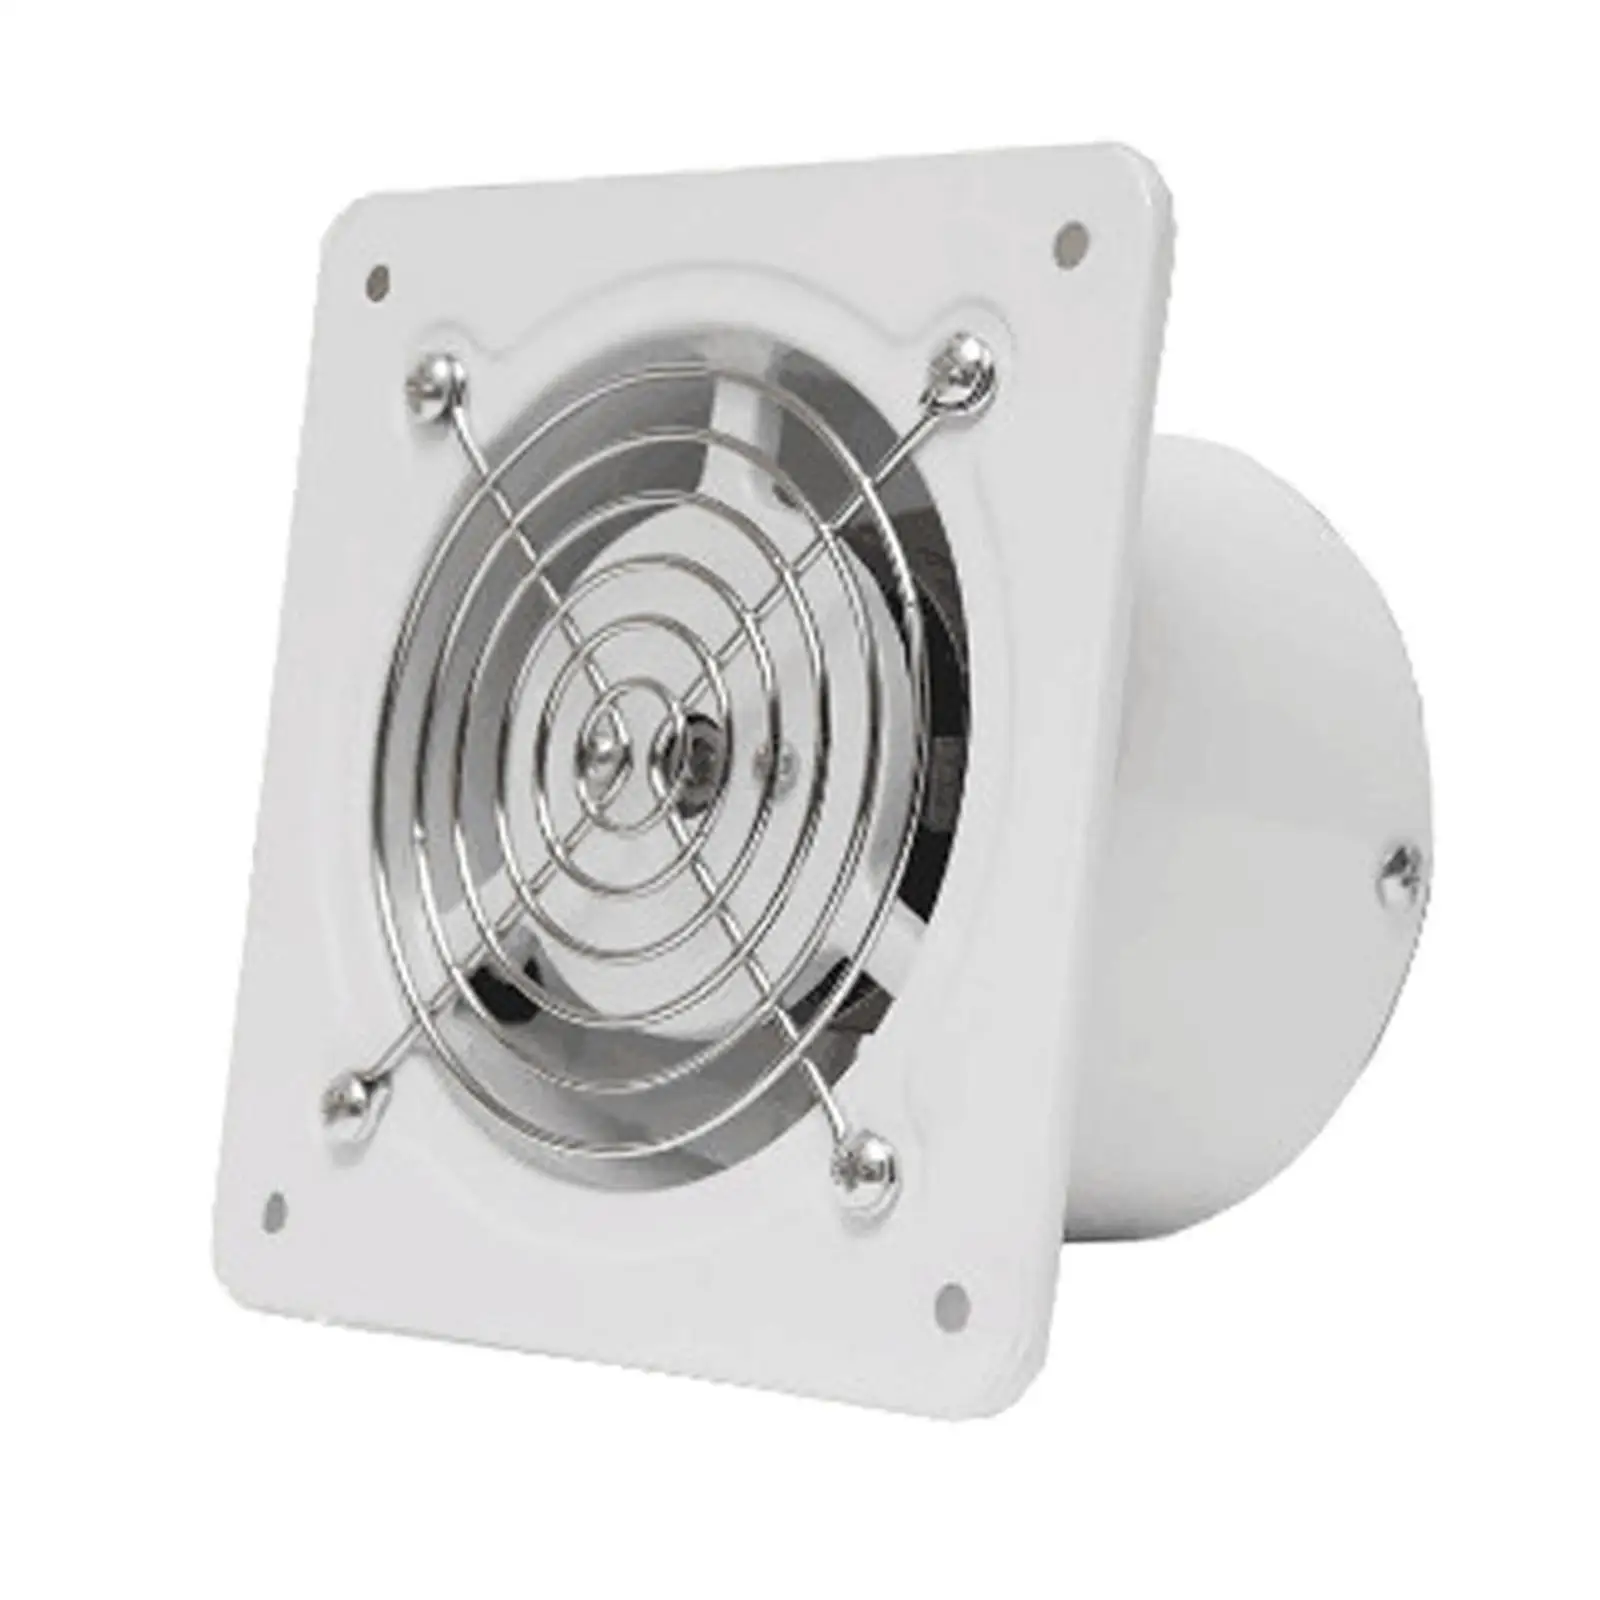 4 inch Exhaust Fan Through Wall Installation Extractor Ventilation Fan High Speed for Window Attic Kitchen Laundry Room